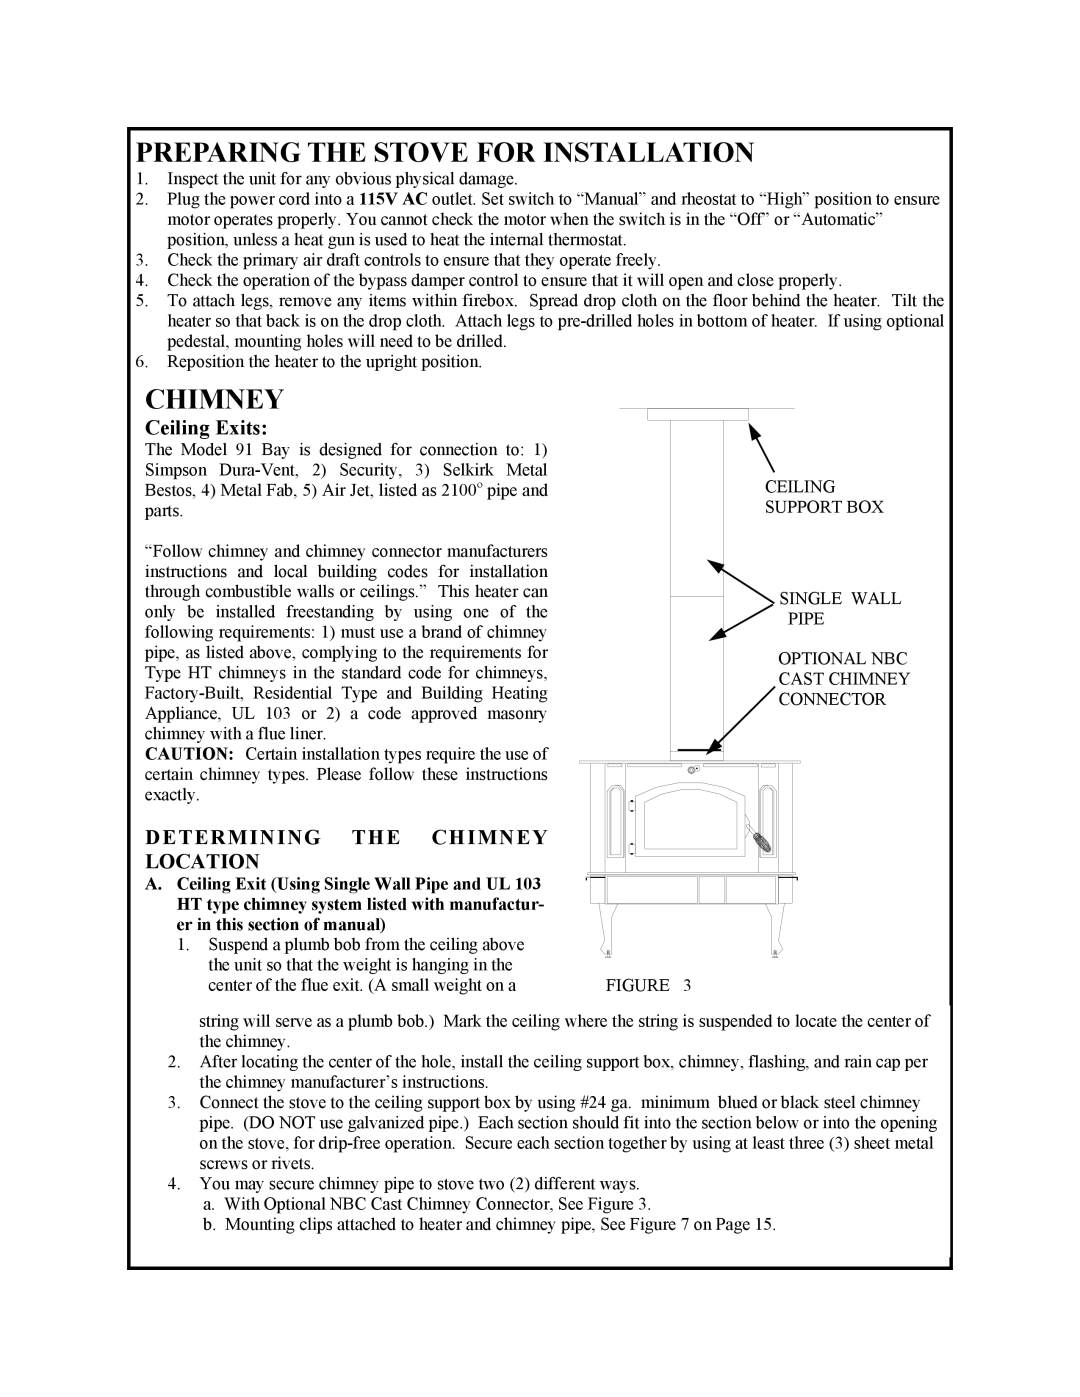 New Buck Corporation 91 manual Preparing The Stove For Installation, Ceiling Exits, Determining The Chimney Location 